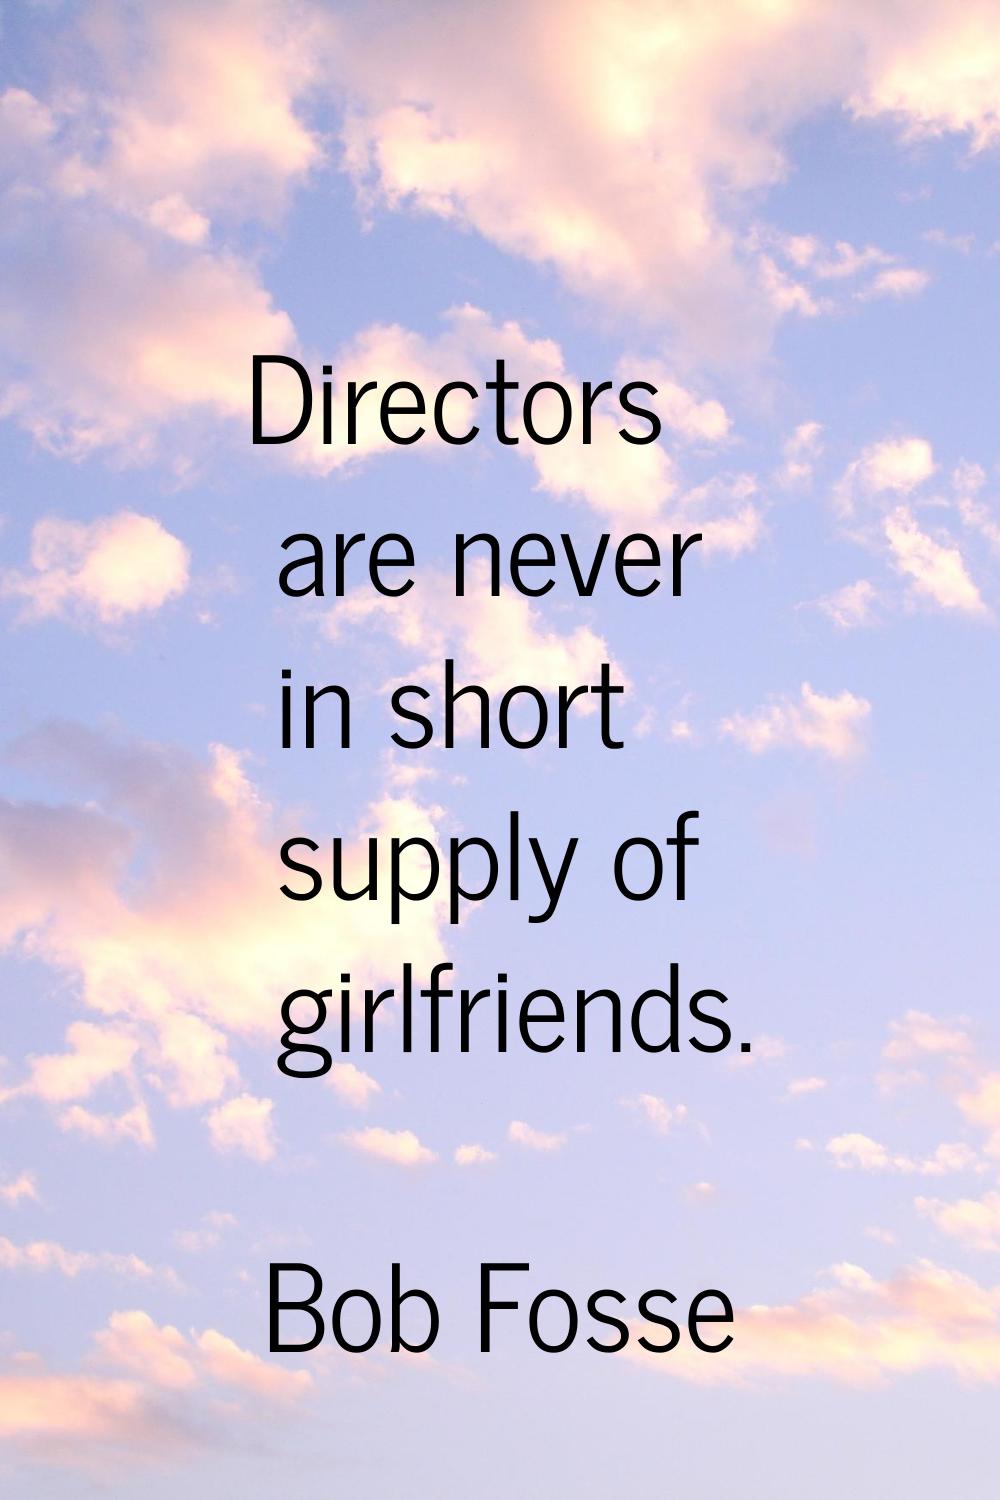 Directors are never in short supply of girlfriends.